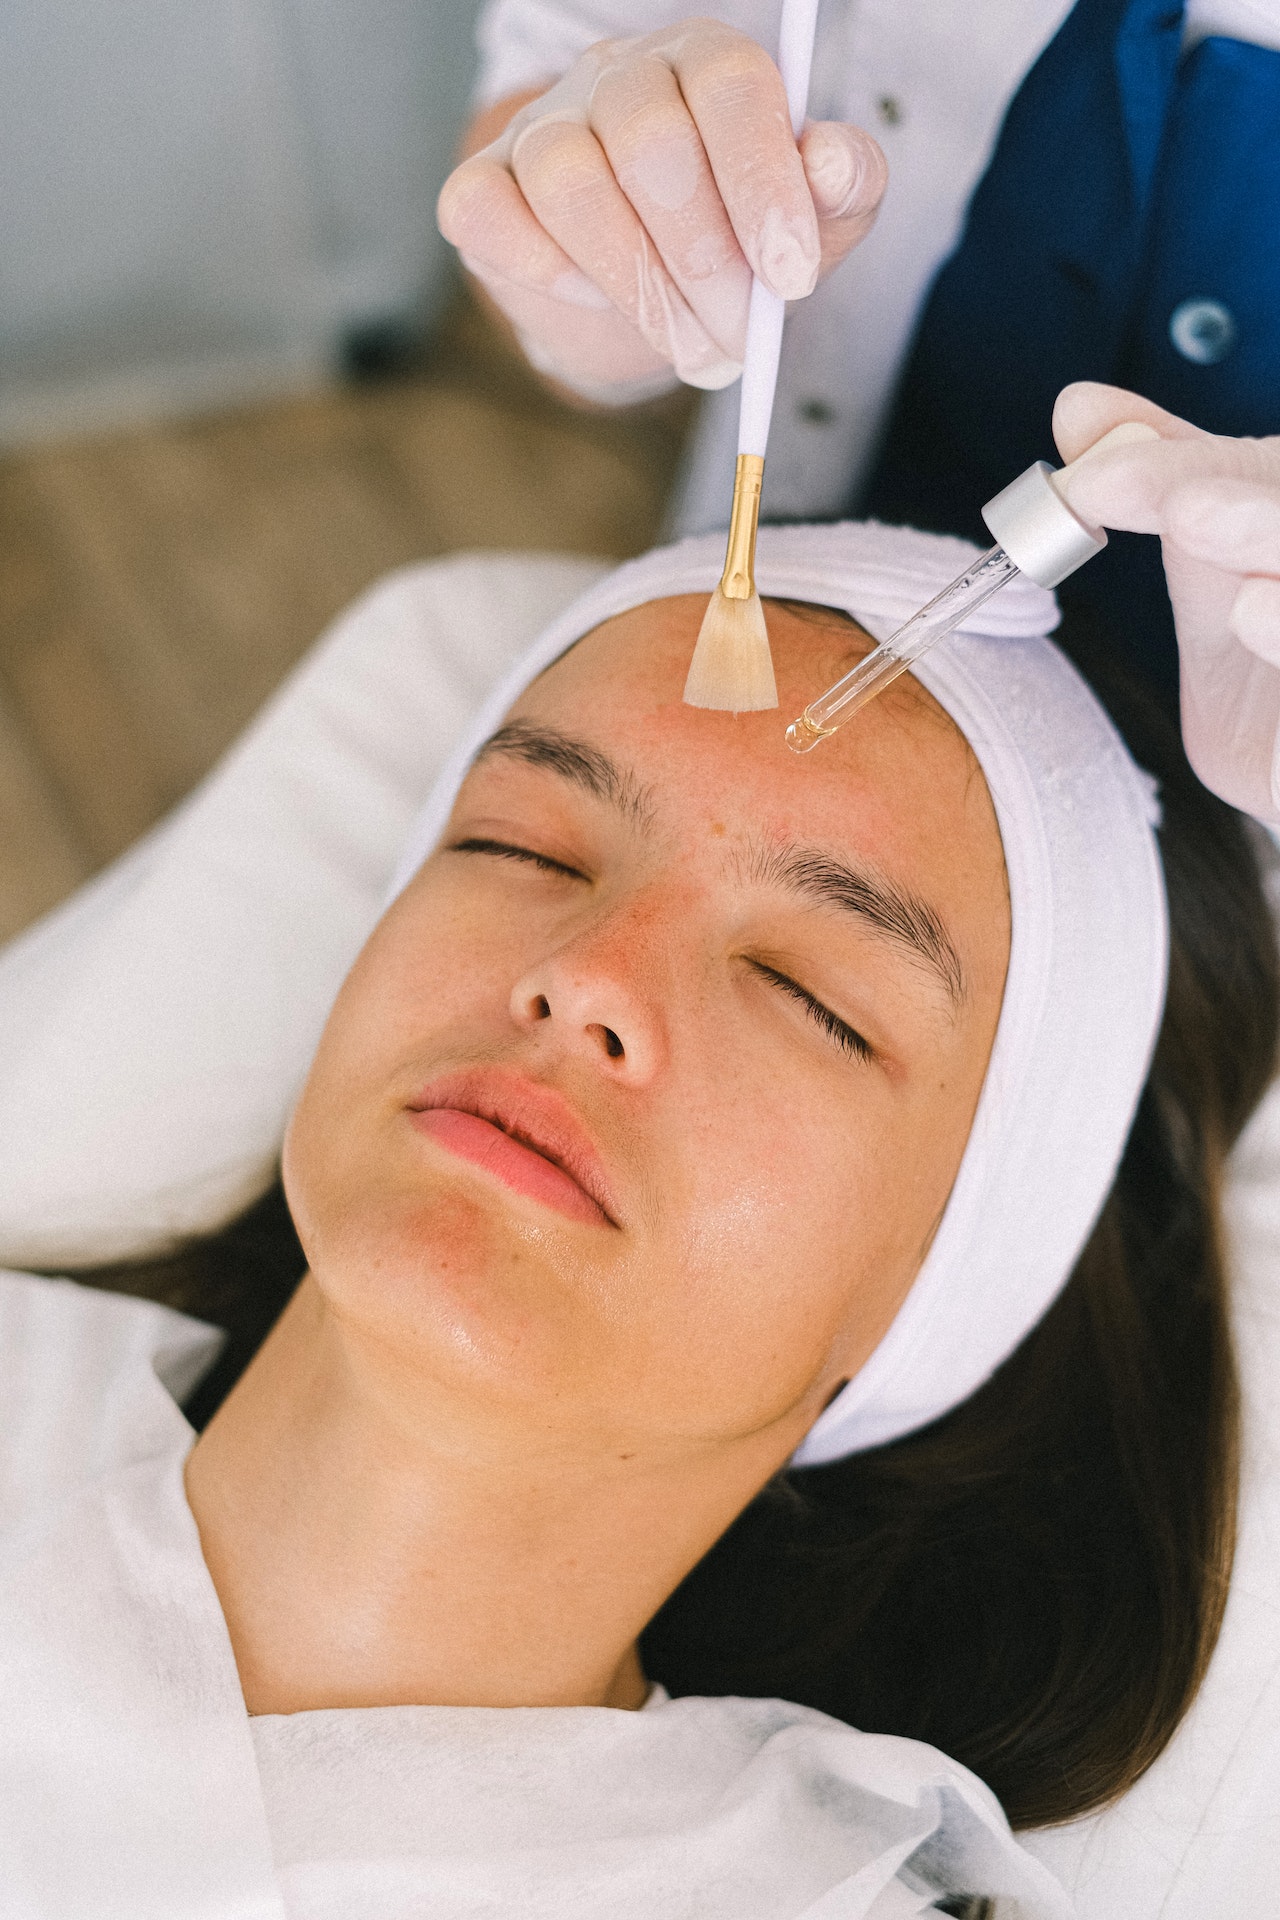 What Your Relationship with Facial Services Says About You